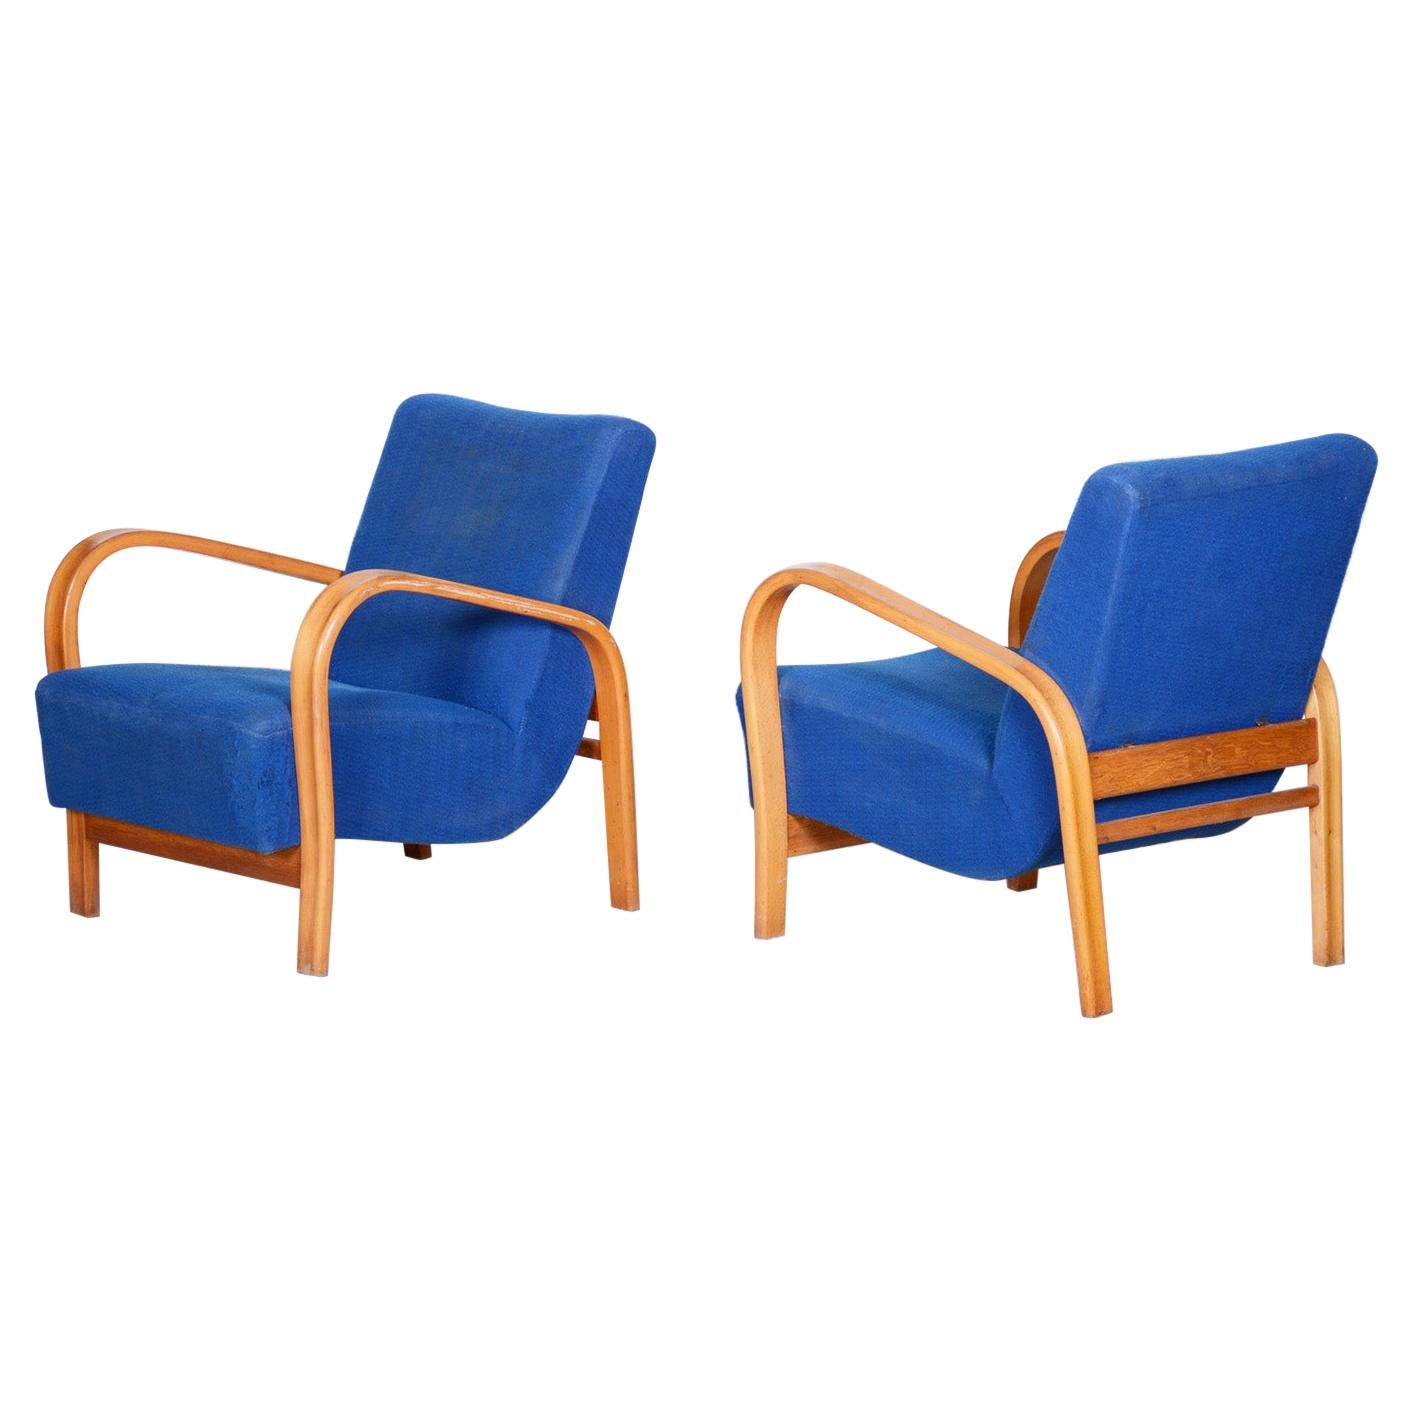 Pair of Mid Century Armchairs Made in Czechia 1930s, Collaboration with Halabala